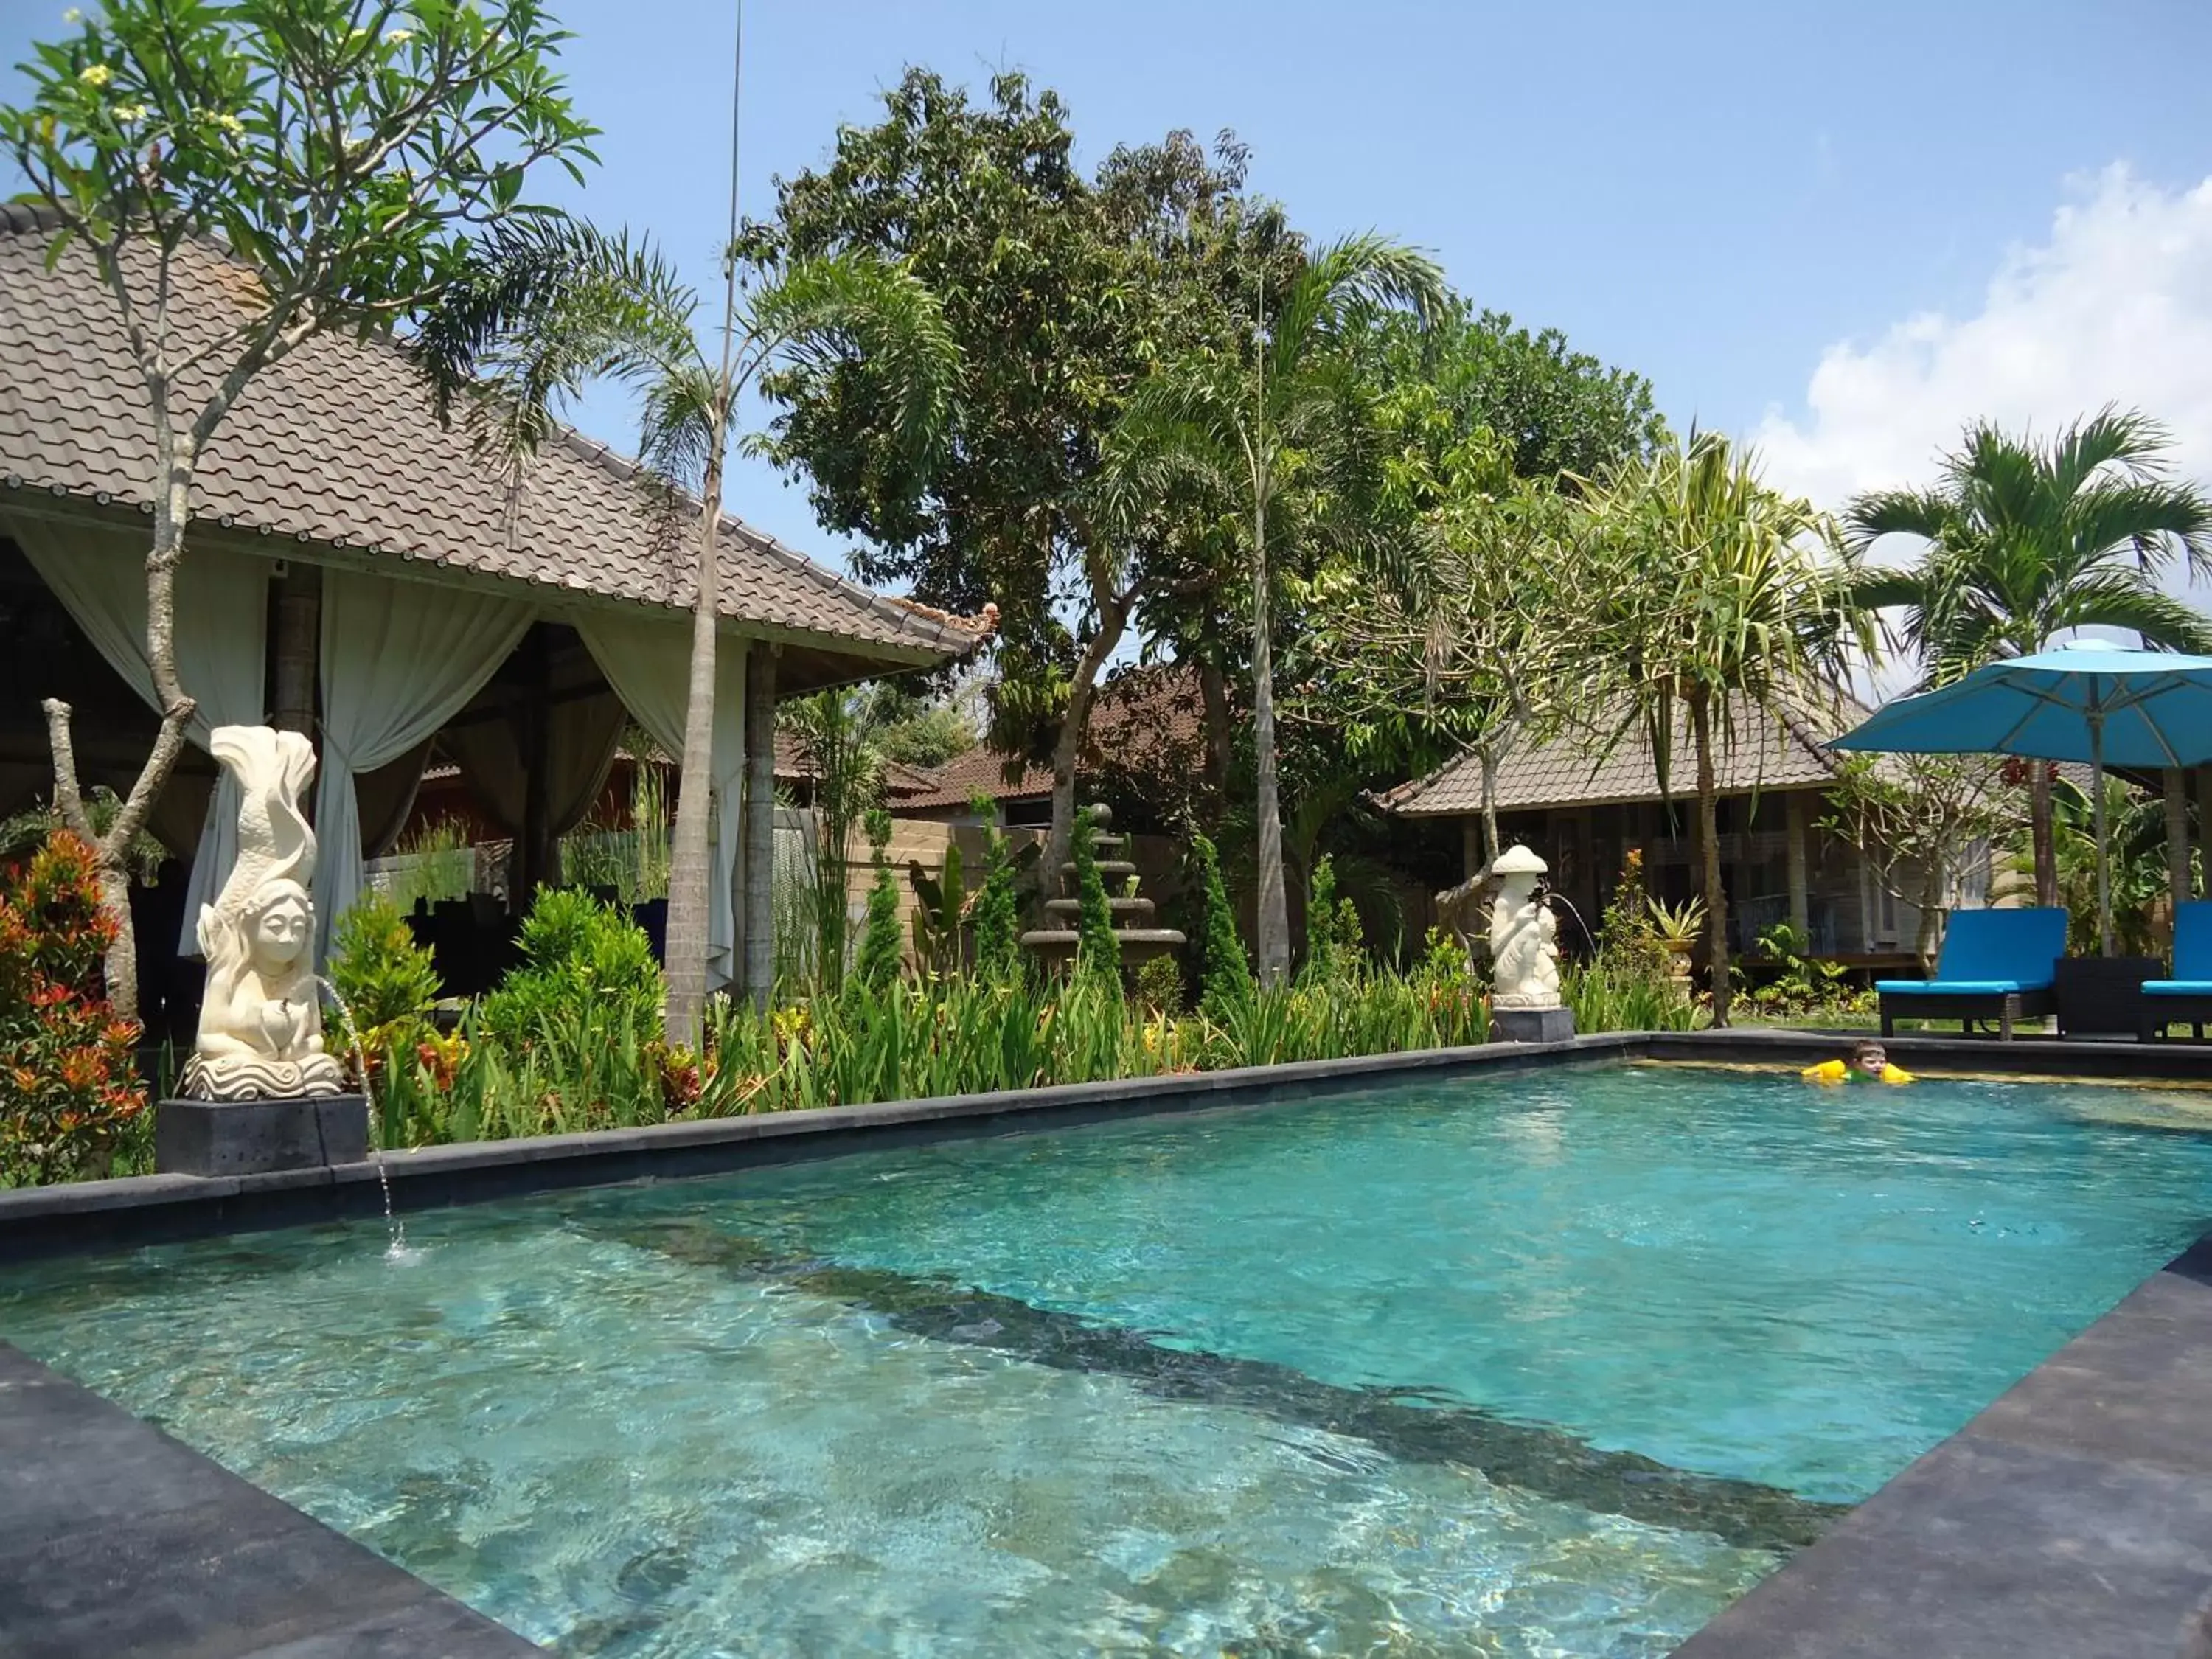 Day, Swimming Pool in The Palm Grove Villas